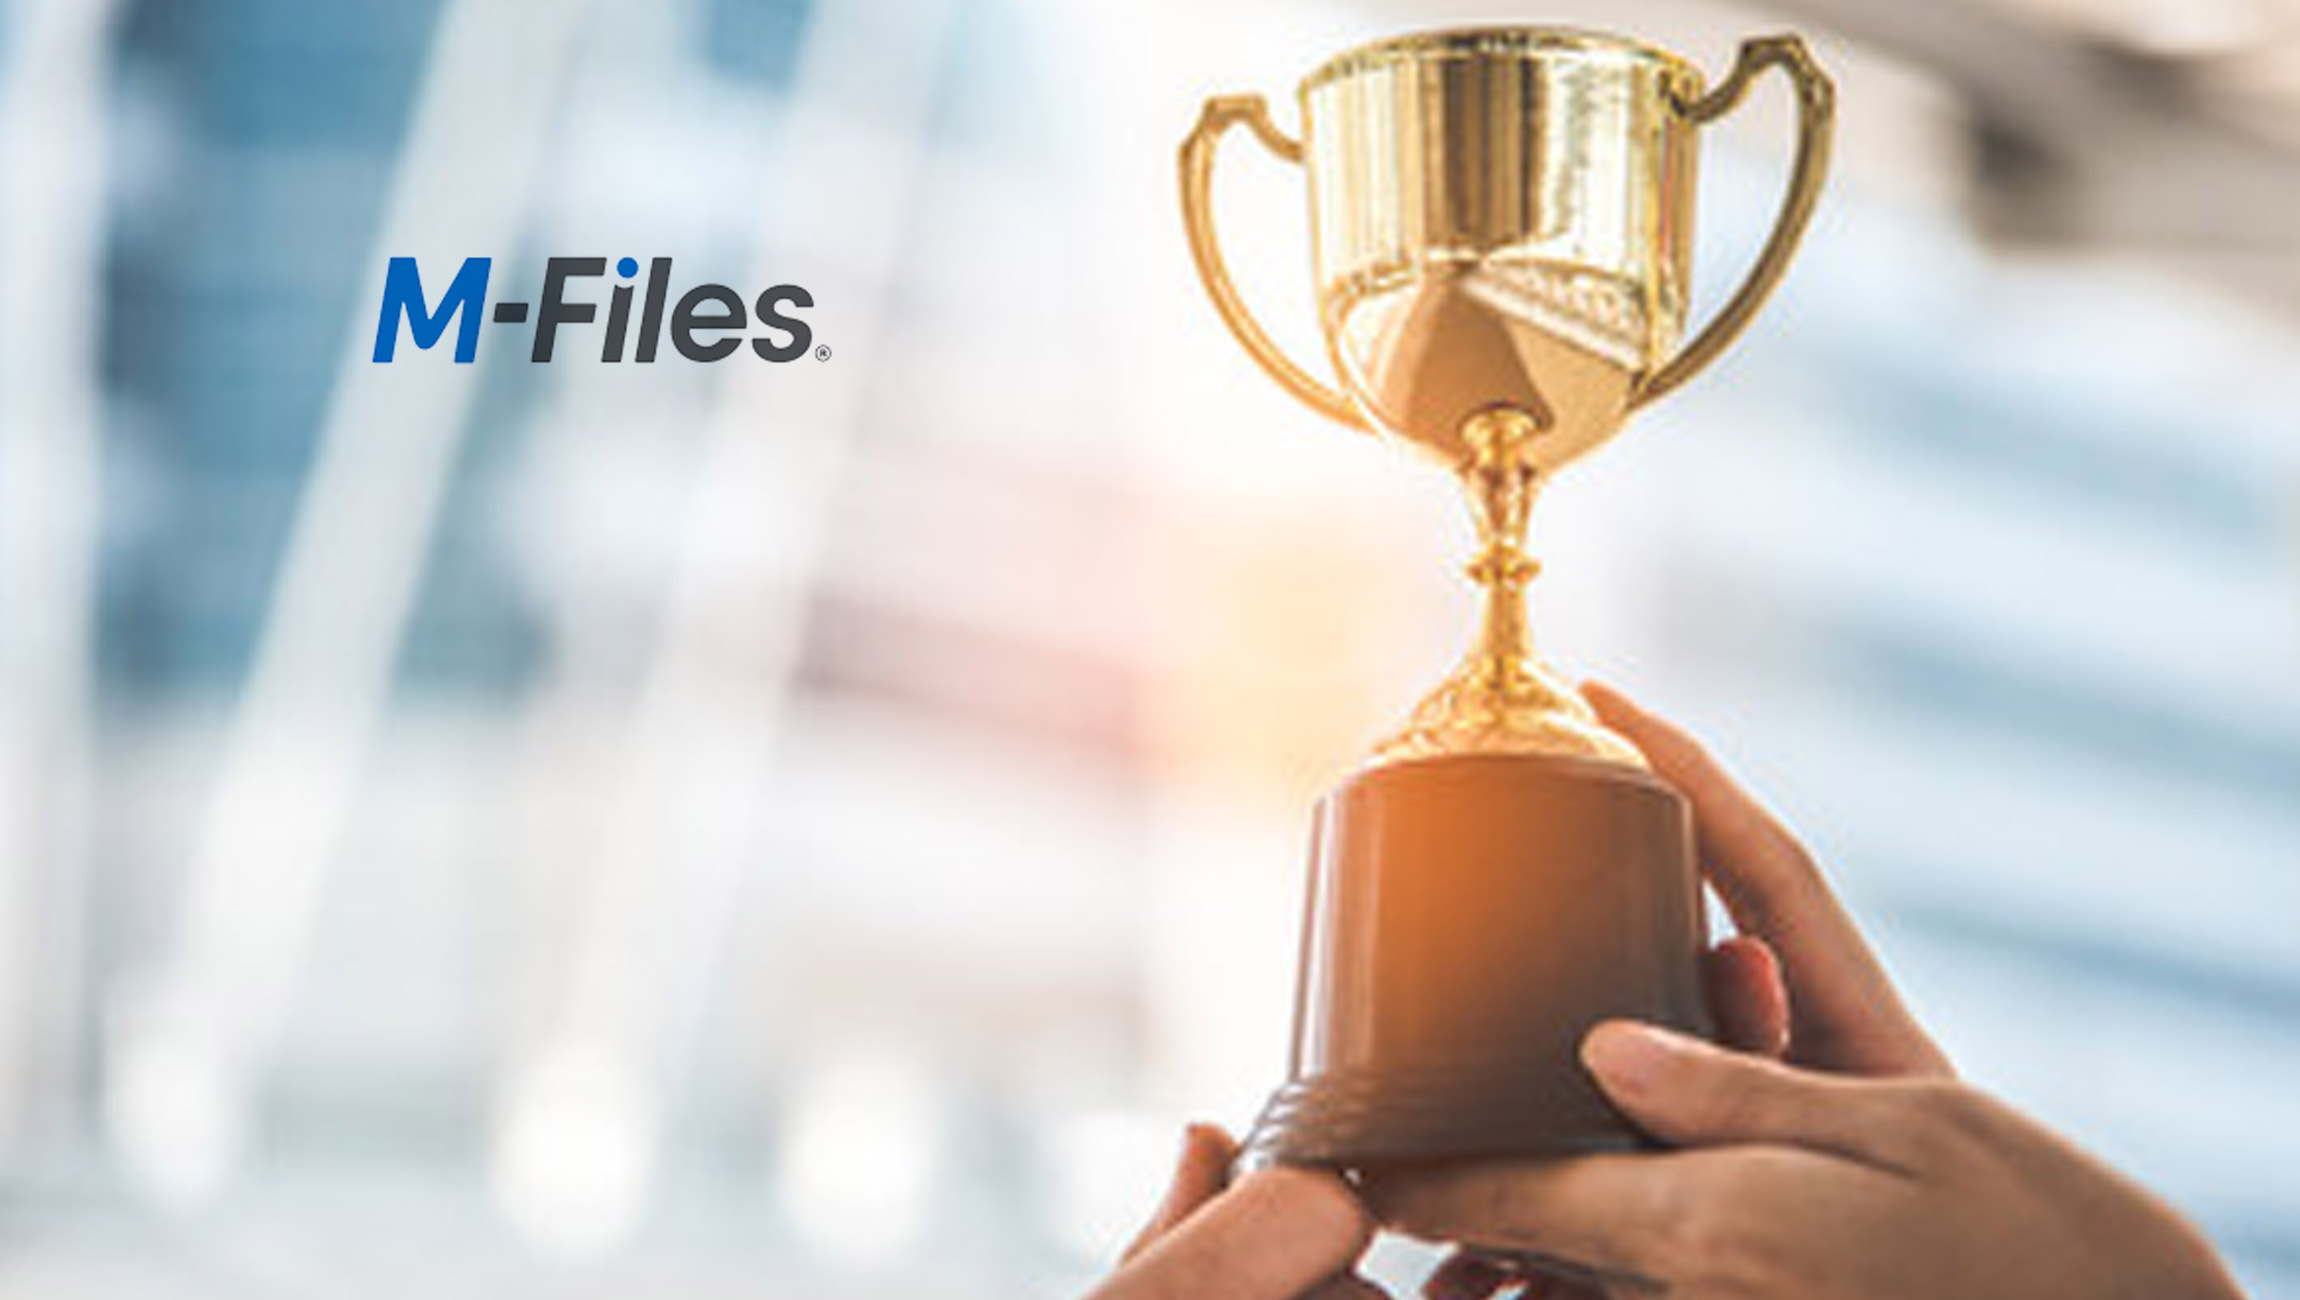 M-Files Wins Best Feature Set and Best Relationship Awards in Document Management from TrustRadius